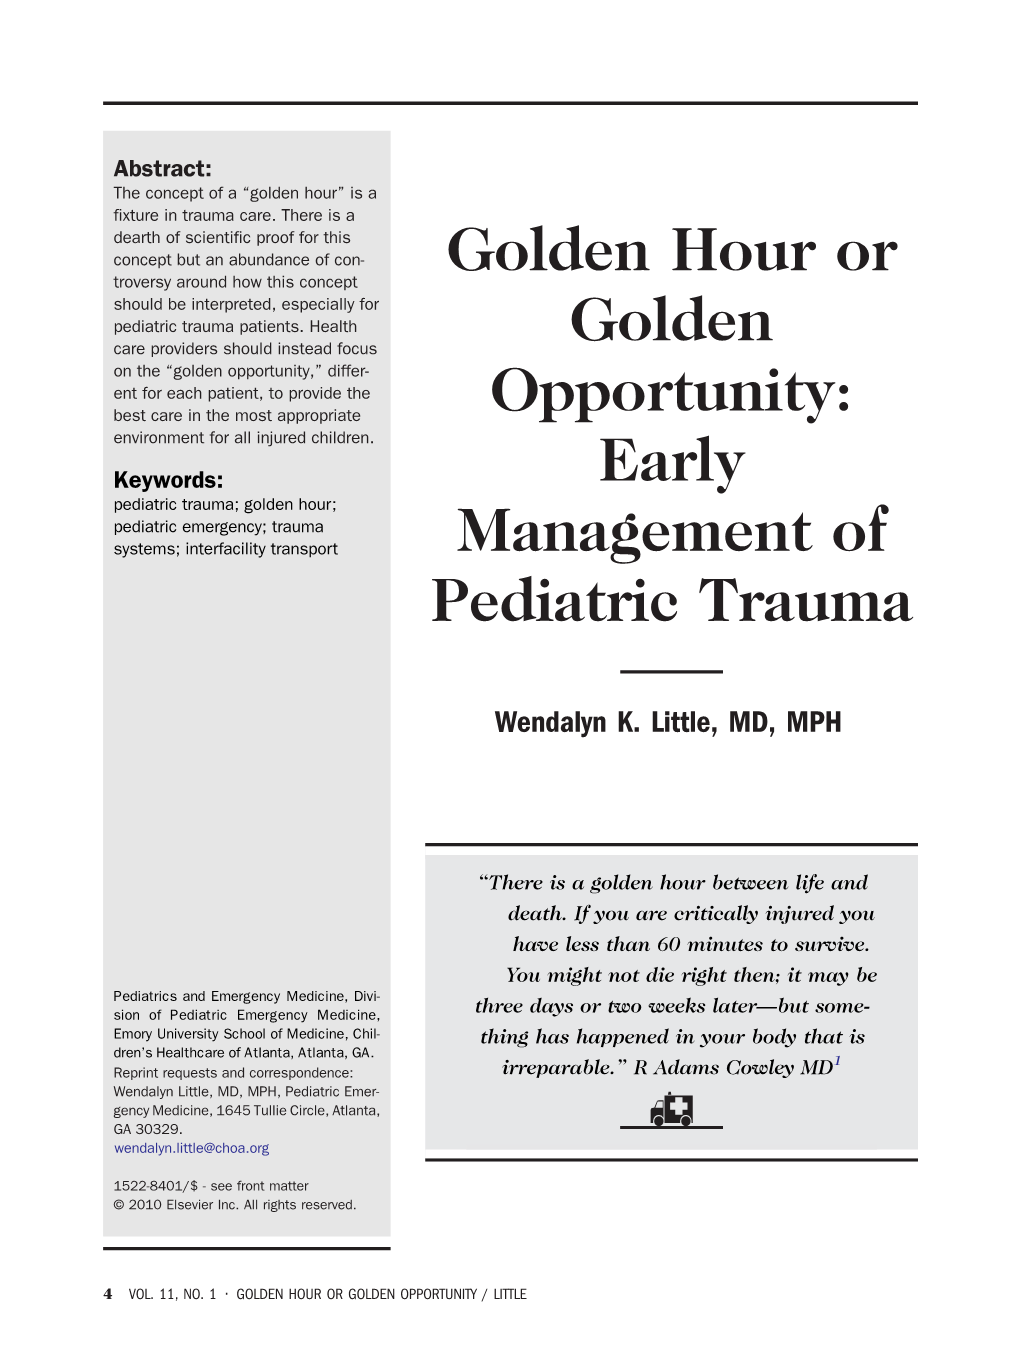 Golden Hour Or Golden Opportunity: Early Management of Pediatric Trauma